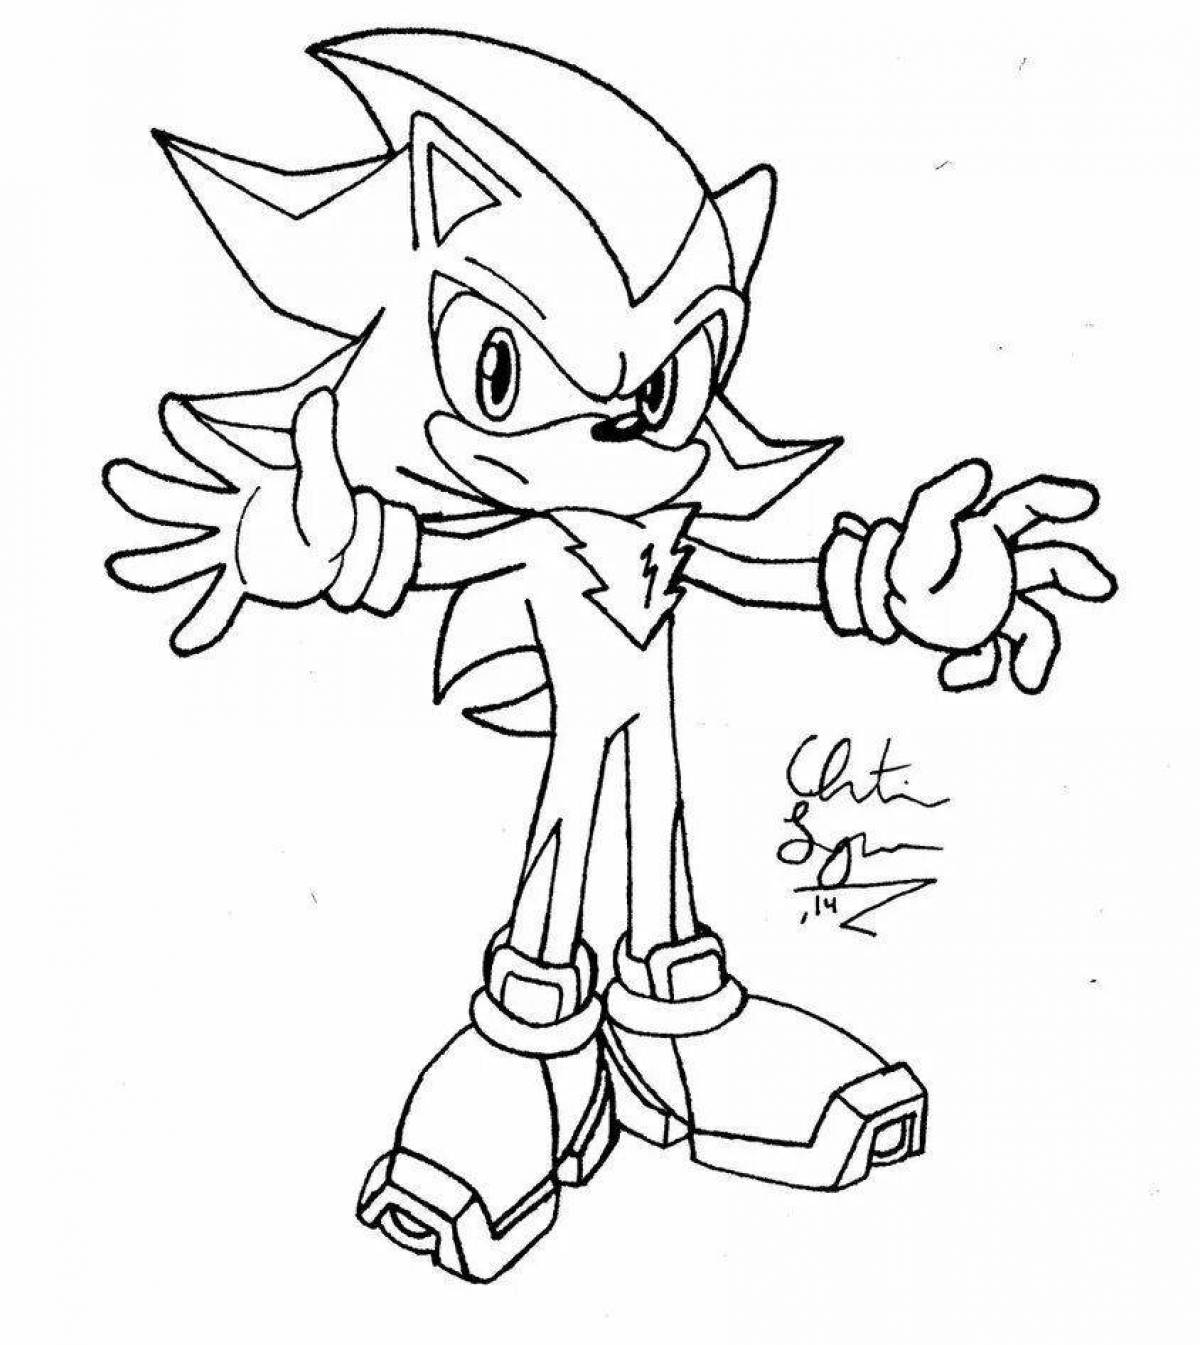 Colouring colorful shadow hedgehog